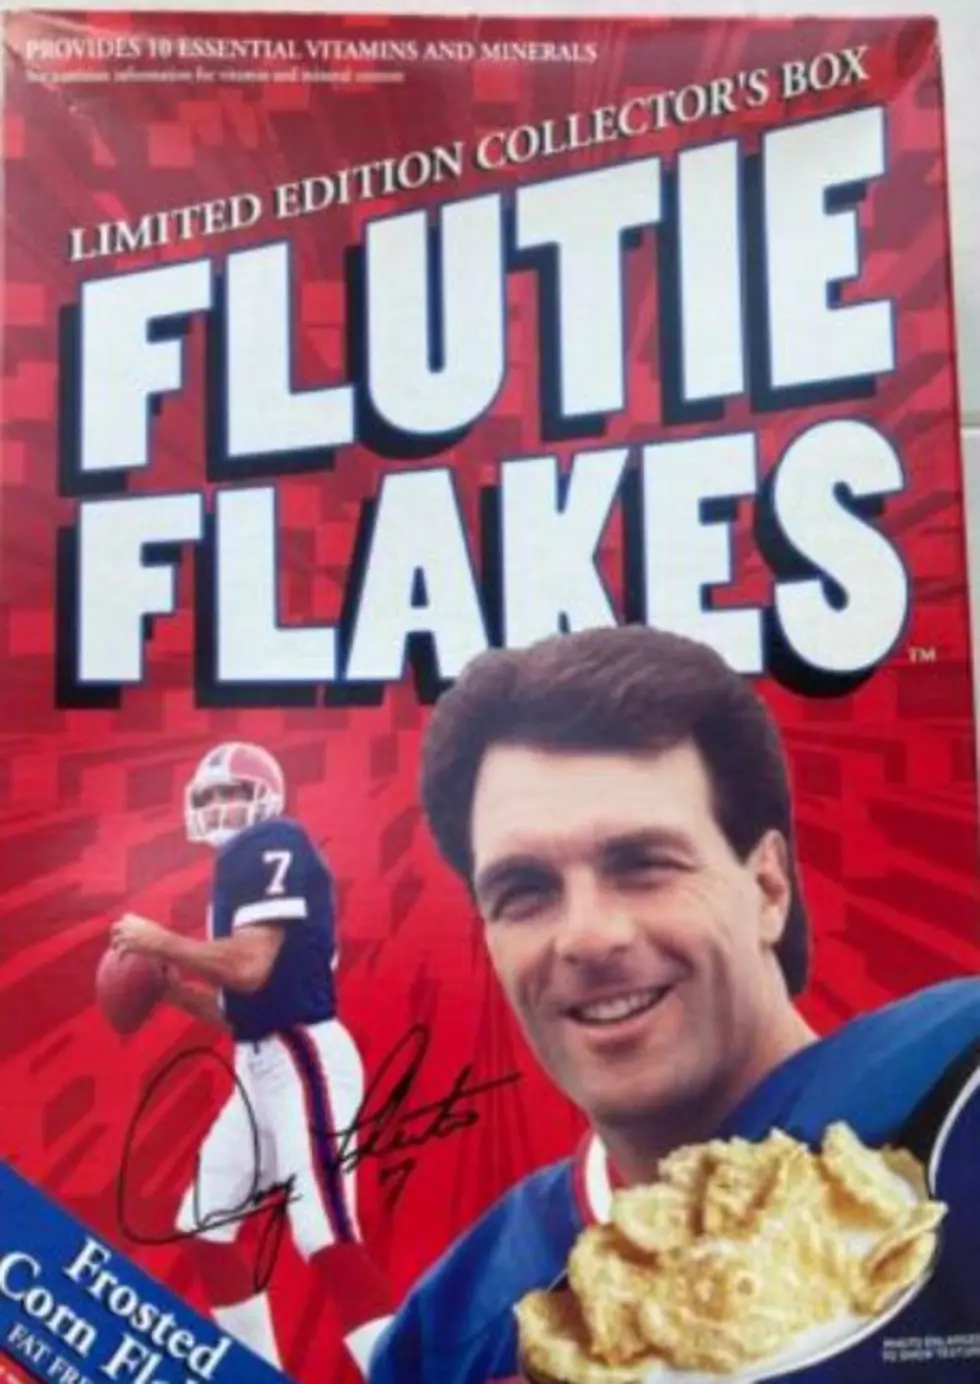 Adult Version Of Flutie Flakes Available In New York